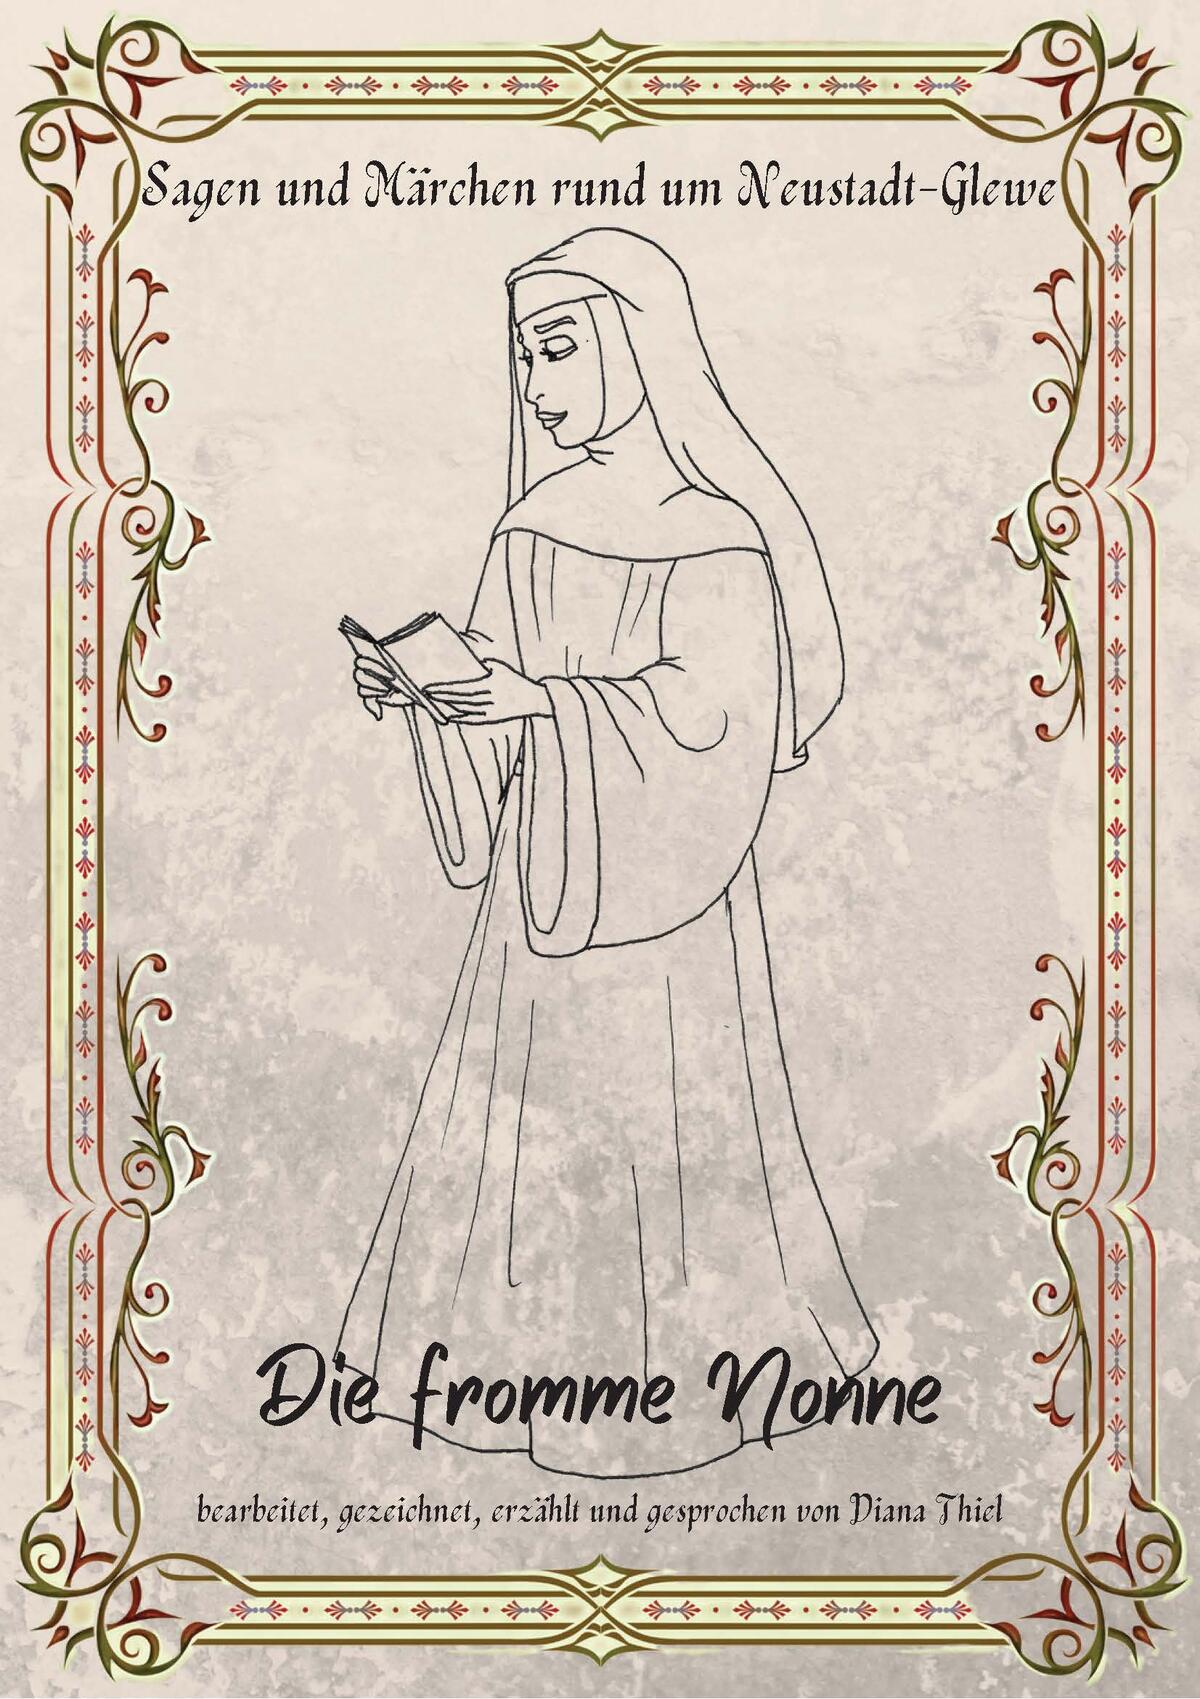 4. Die fromme Nonne